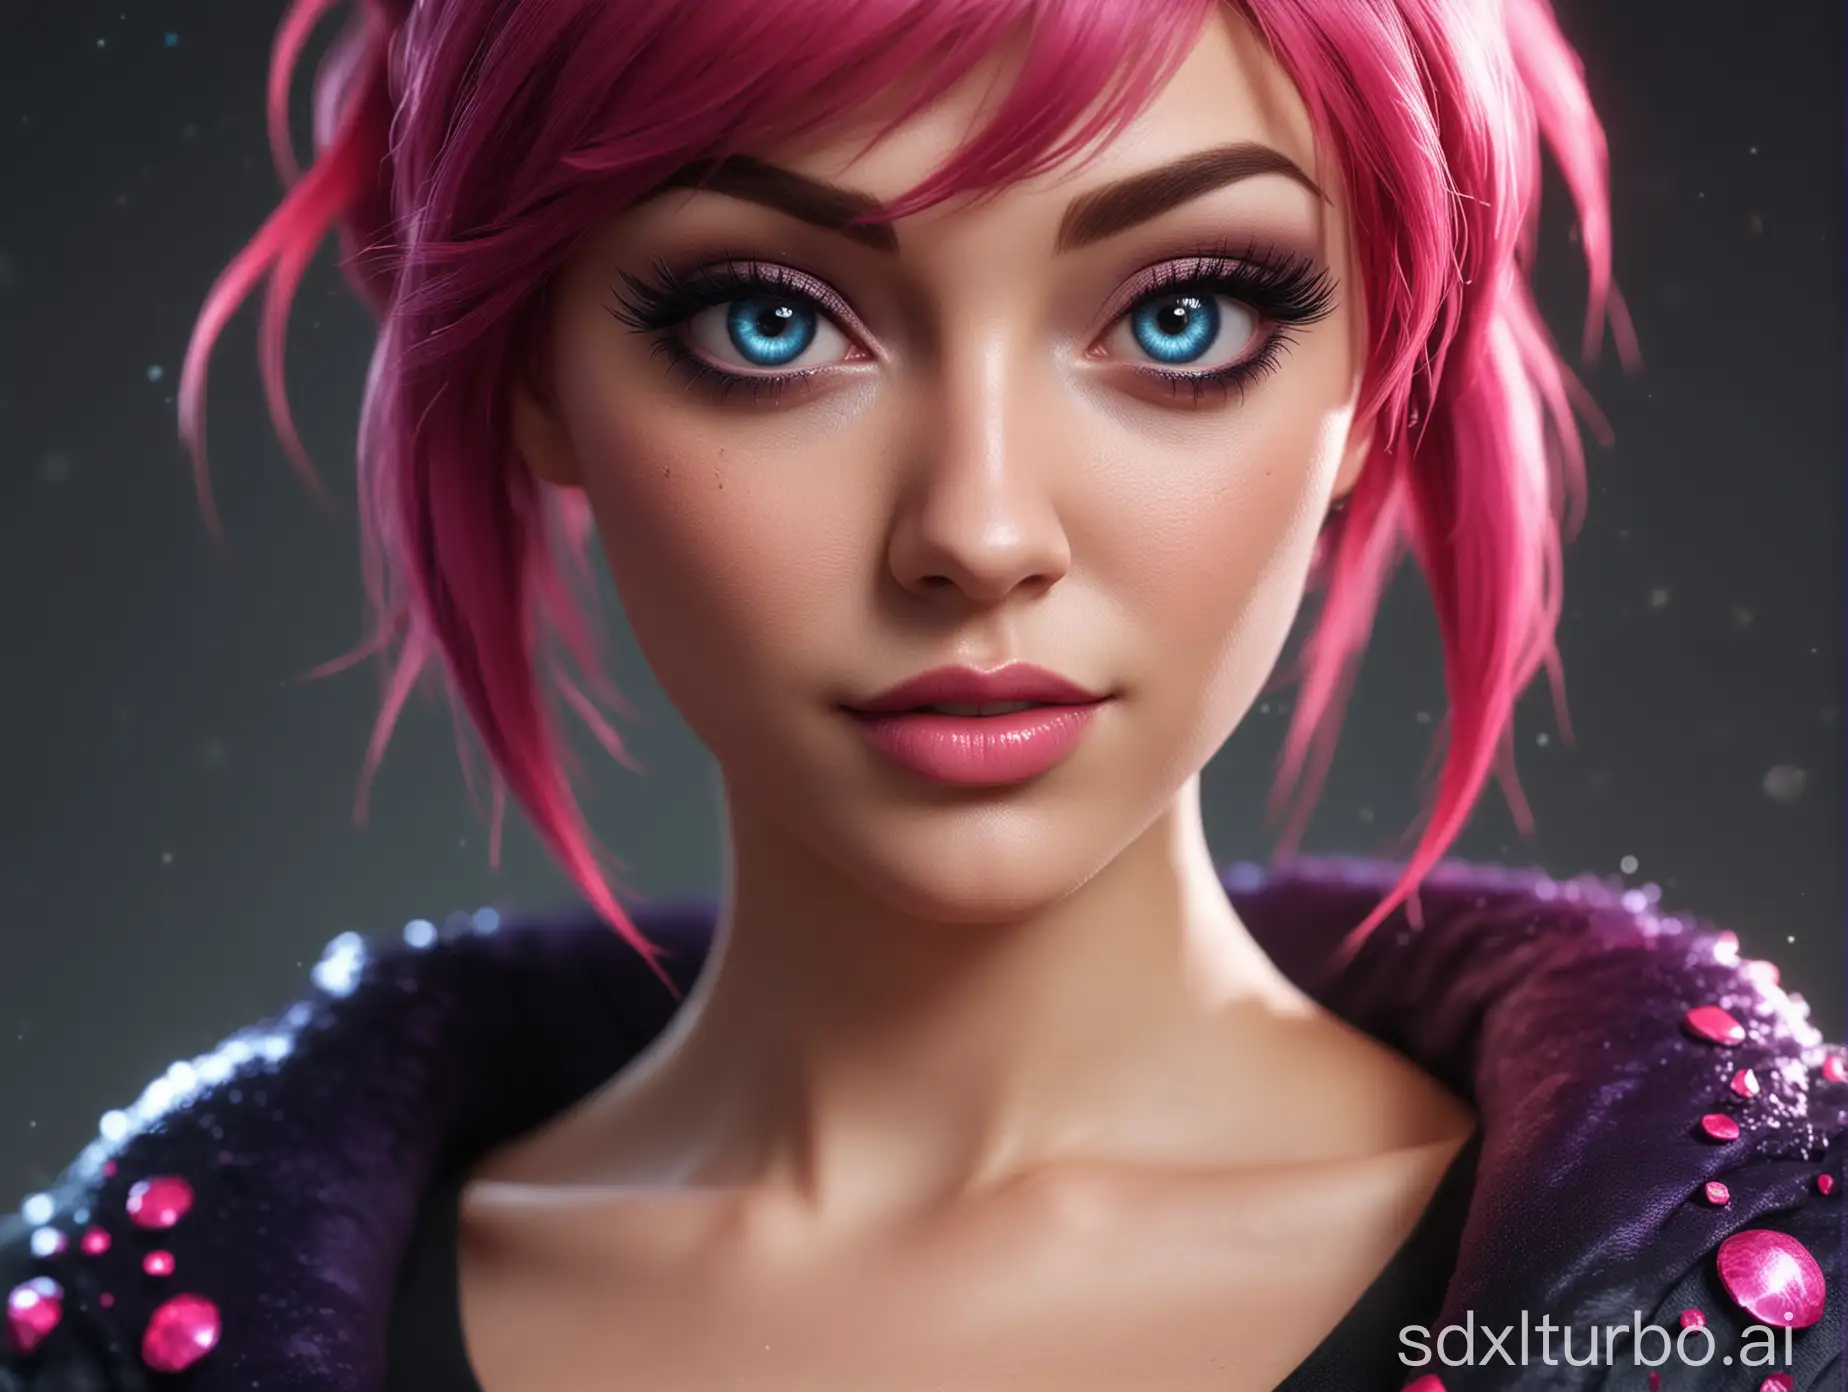 Macroscale-RealLife-Evelynn-from-League-of-Legends-Detailed-Depth-and-Imperfections-in-8K